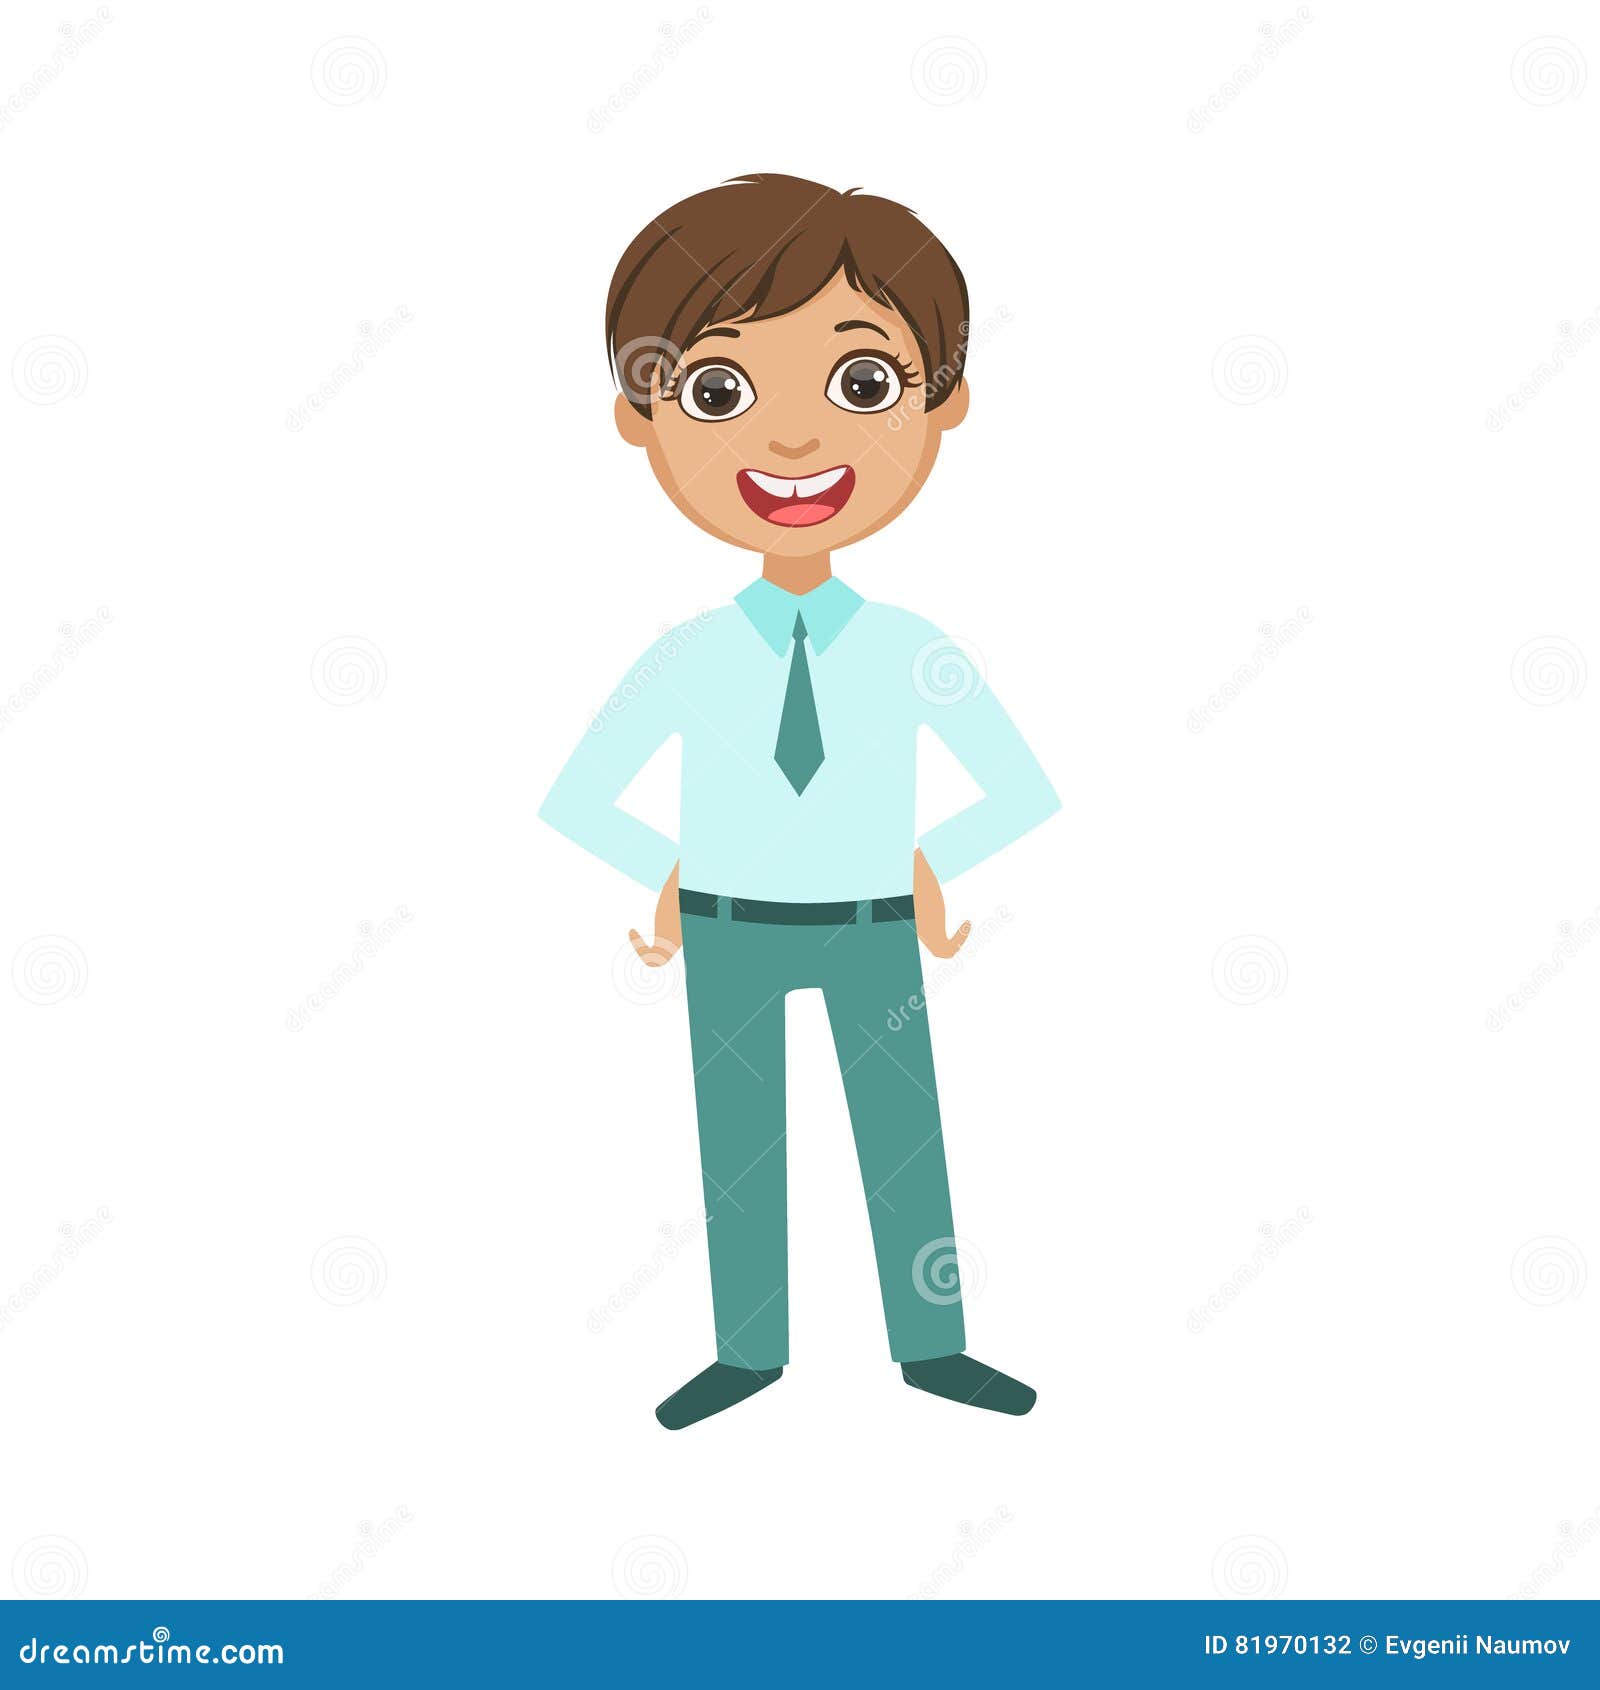 Boy in Blue Trousers and Shirt with Tie Happy Schoolkid in School Uniform  Standing and Smiling Cartoon Character Stock Vector - Illustration of  education, uniform: 81970132